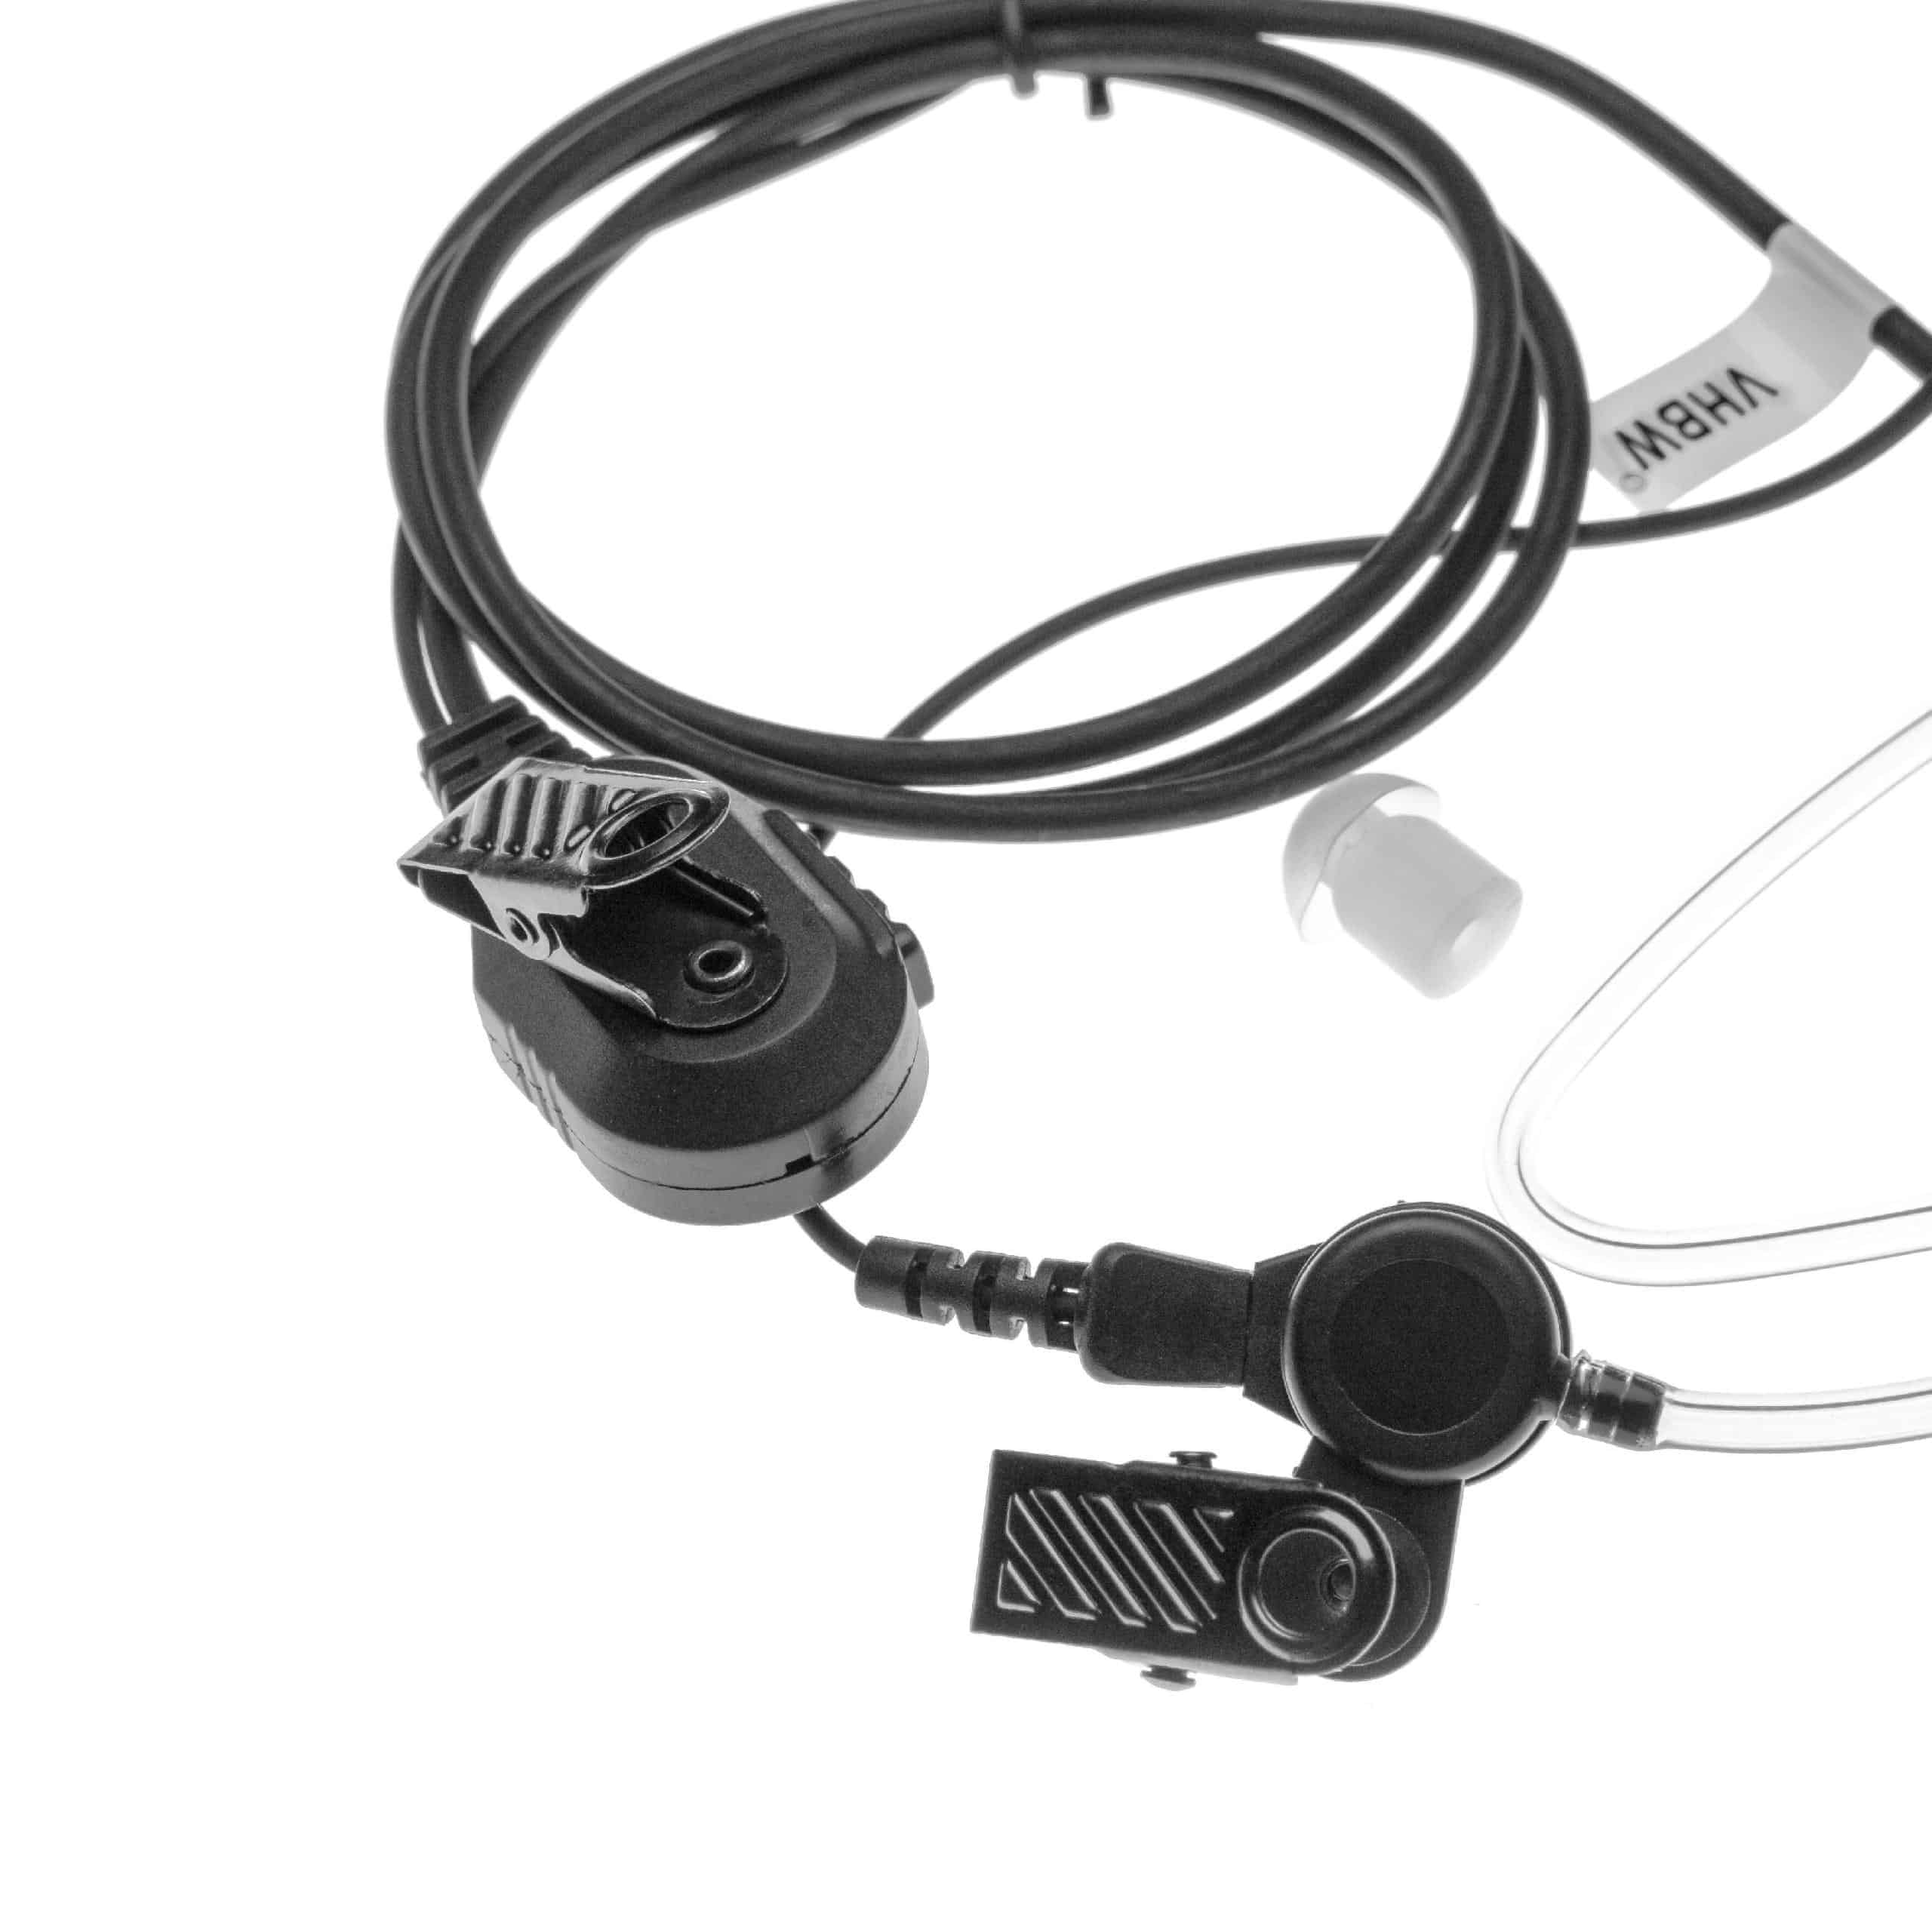 Security Radio Headset suitable for Yaesu VX-2R - with PTT Microphone + Clip Mount + phonowire